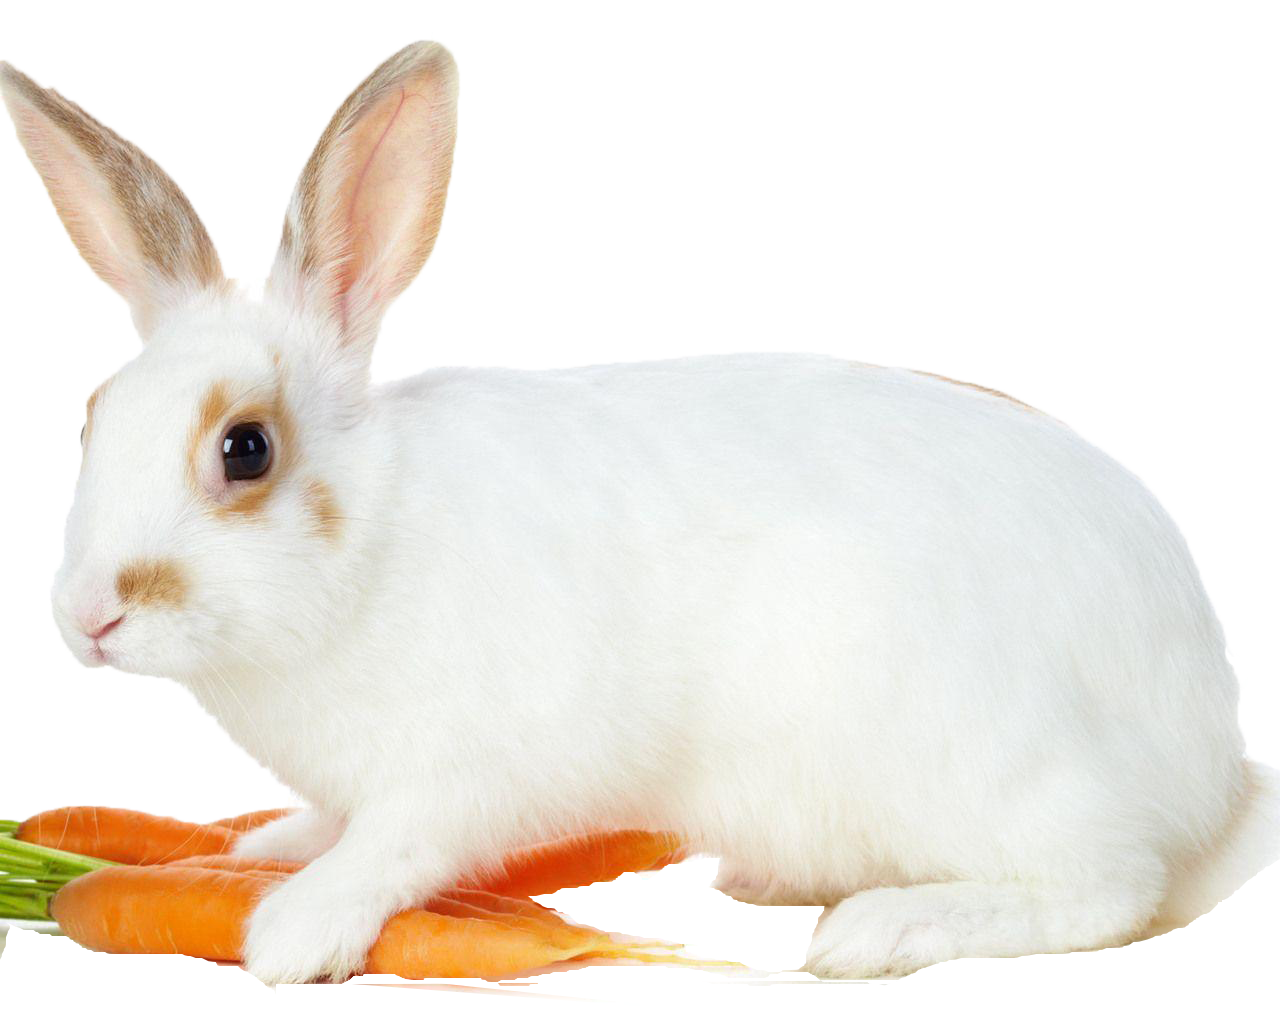 A White Rabbit With Brown Ears And A Carrot